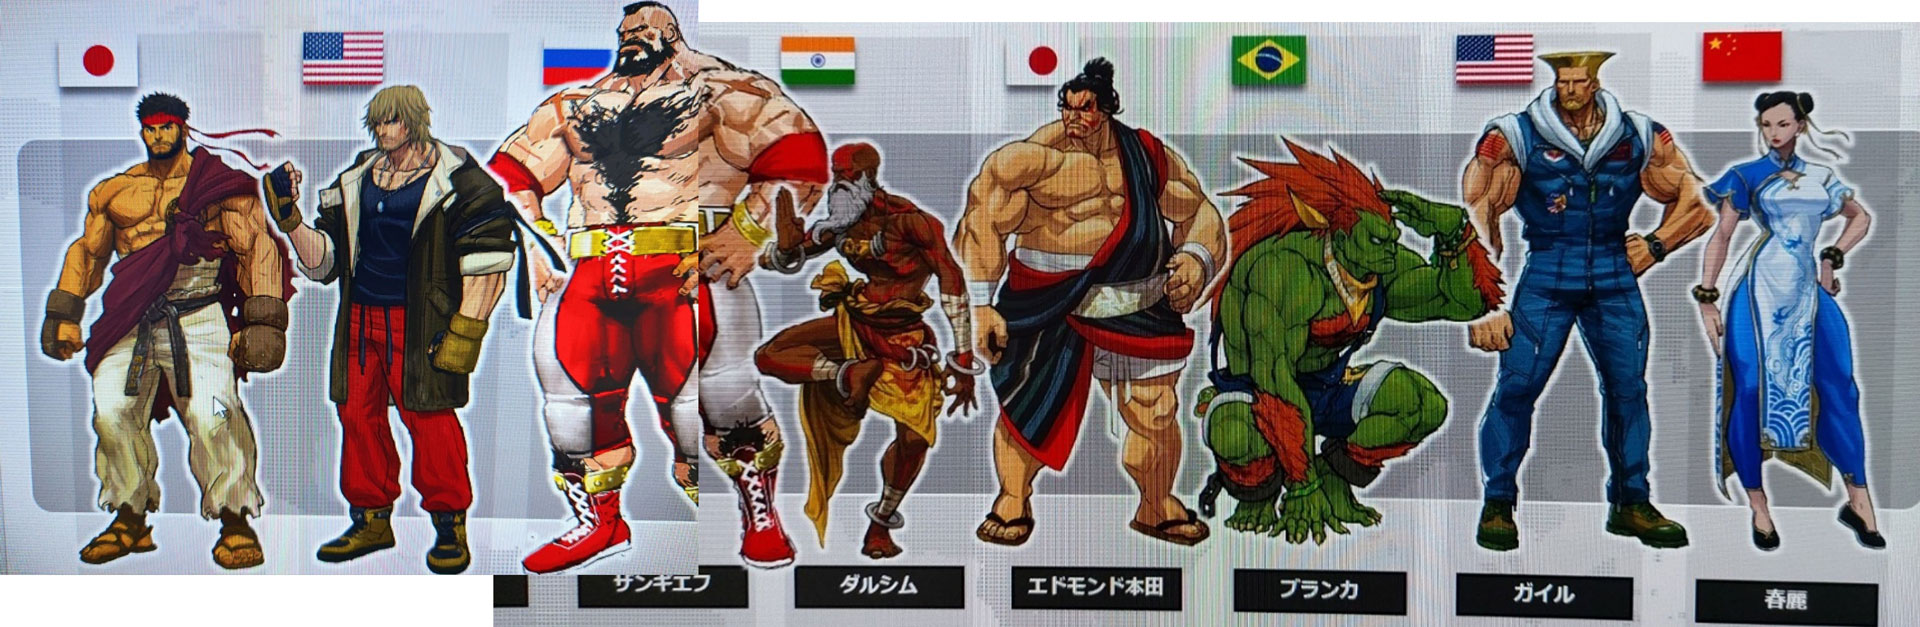 Street Fighter 6 launch roster missing leaked Ed, Rashid, and Akuma